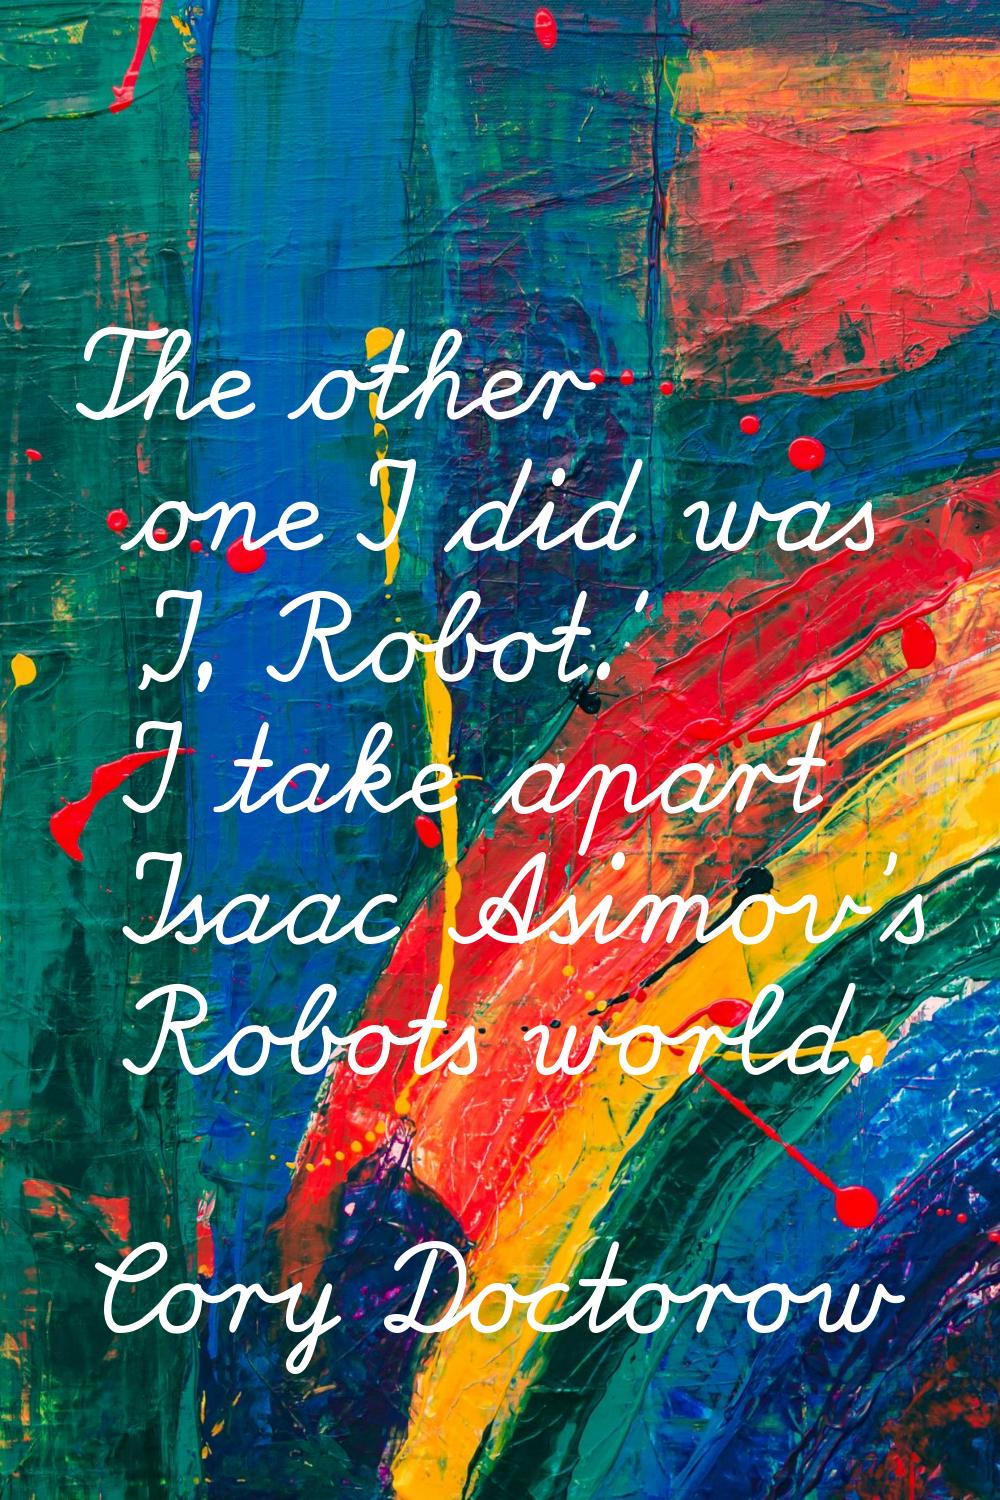 The other one I did was 'I, Robot.' I take apart Isaac Asimov's Robots world.